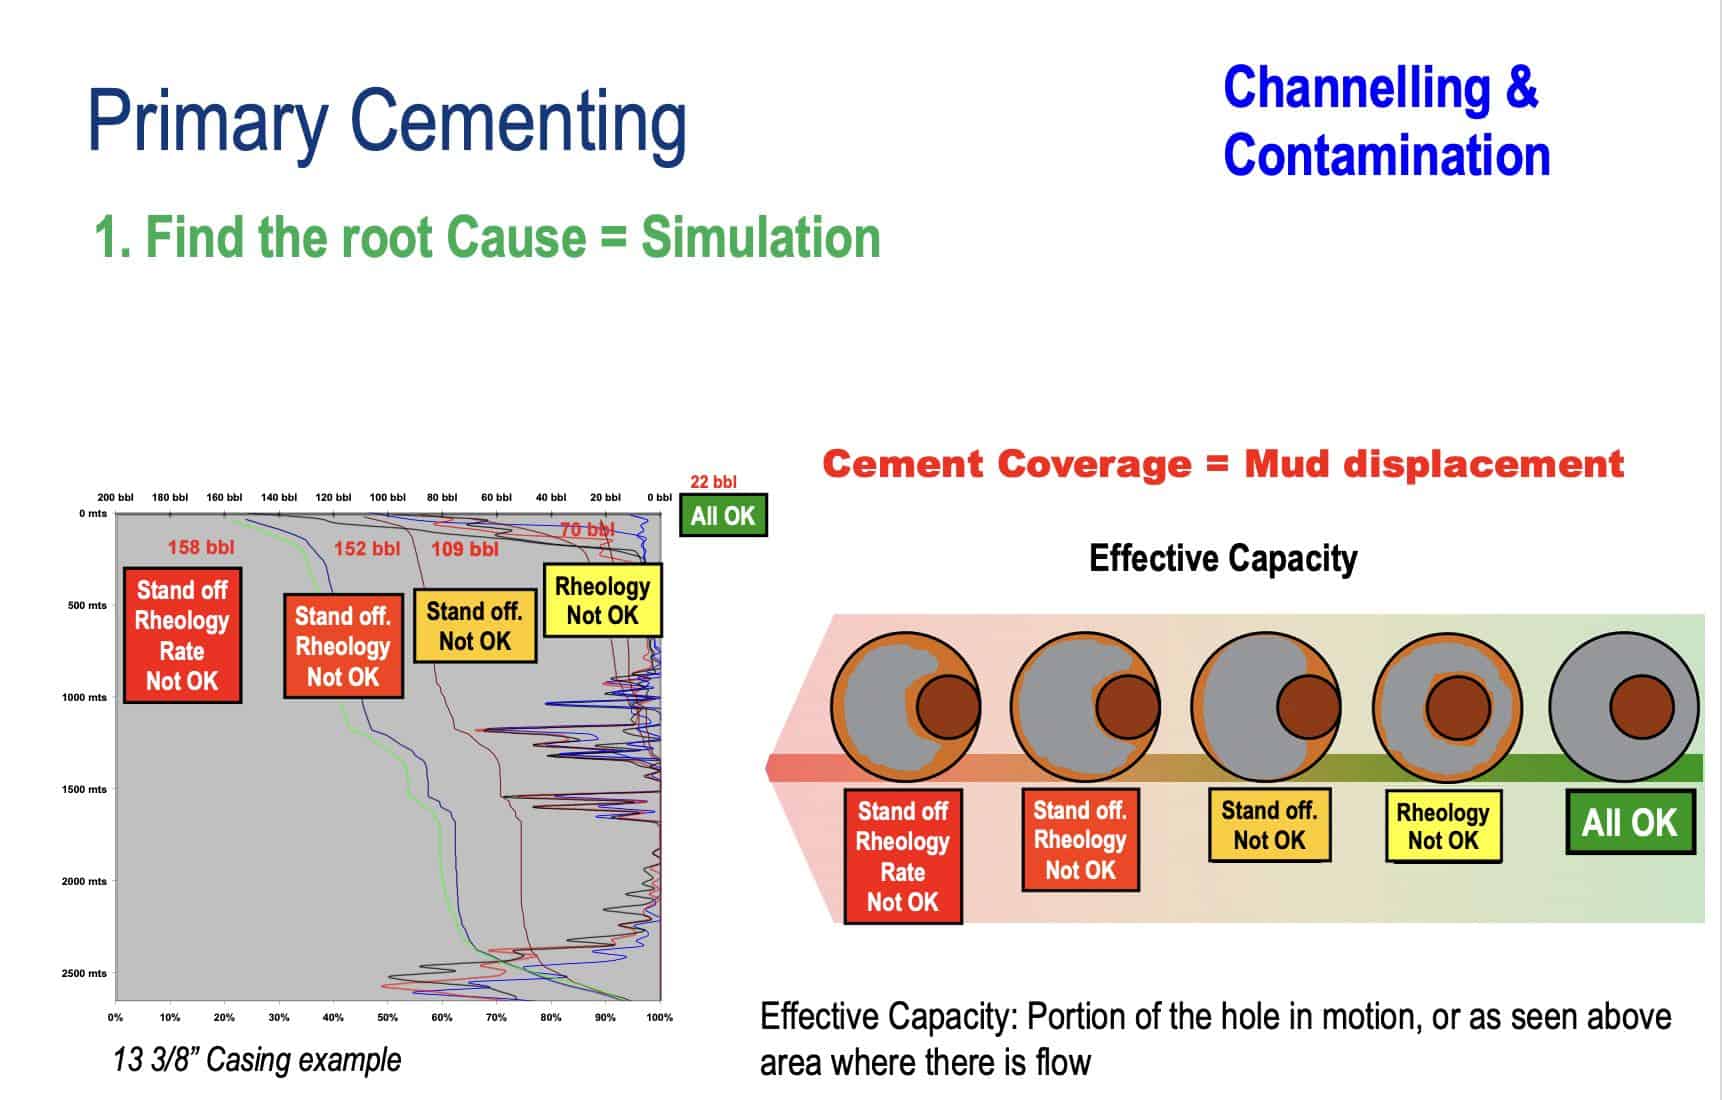 Max Out Your Cement Coverage - Better Well Cementing for ALL